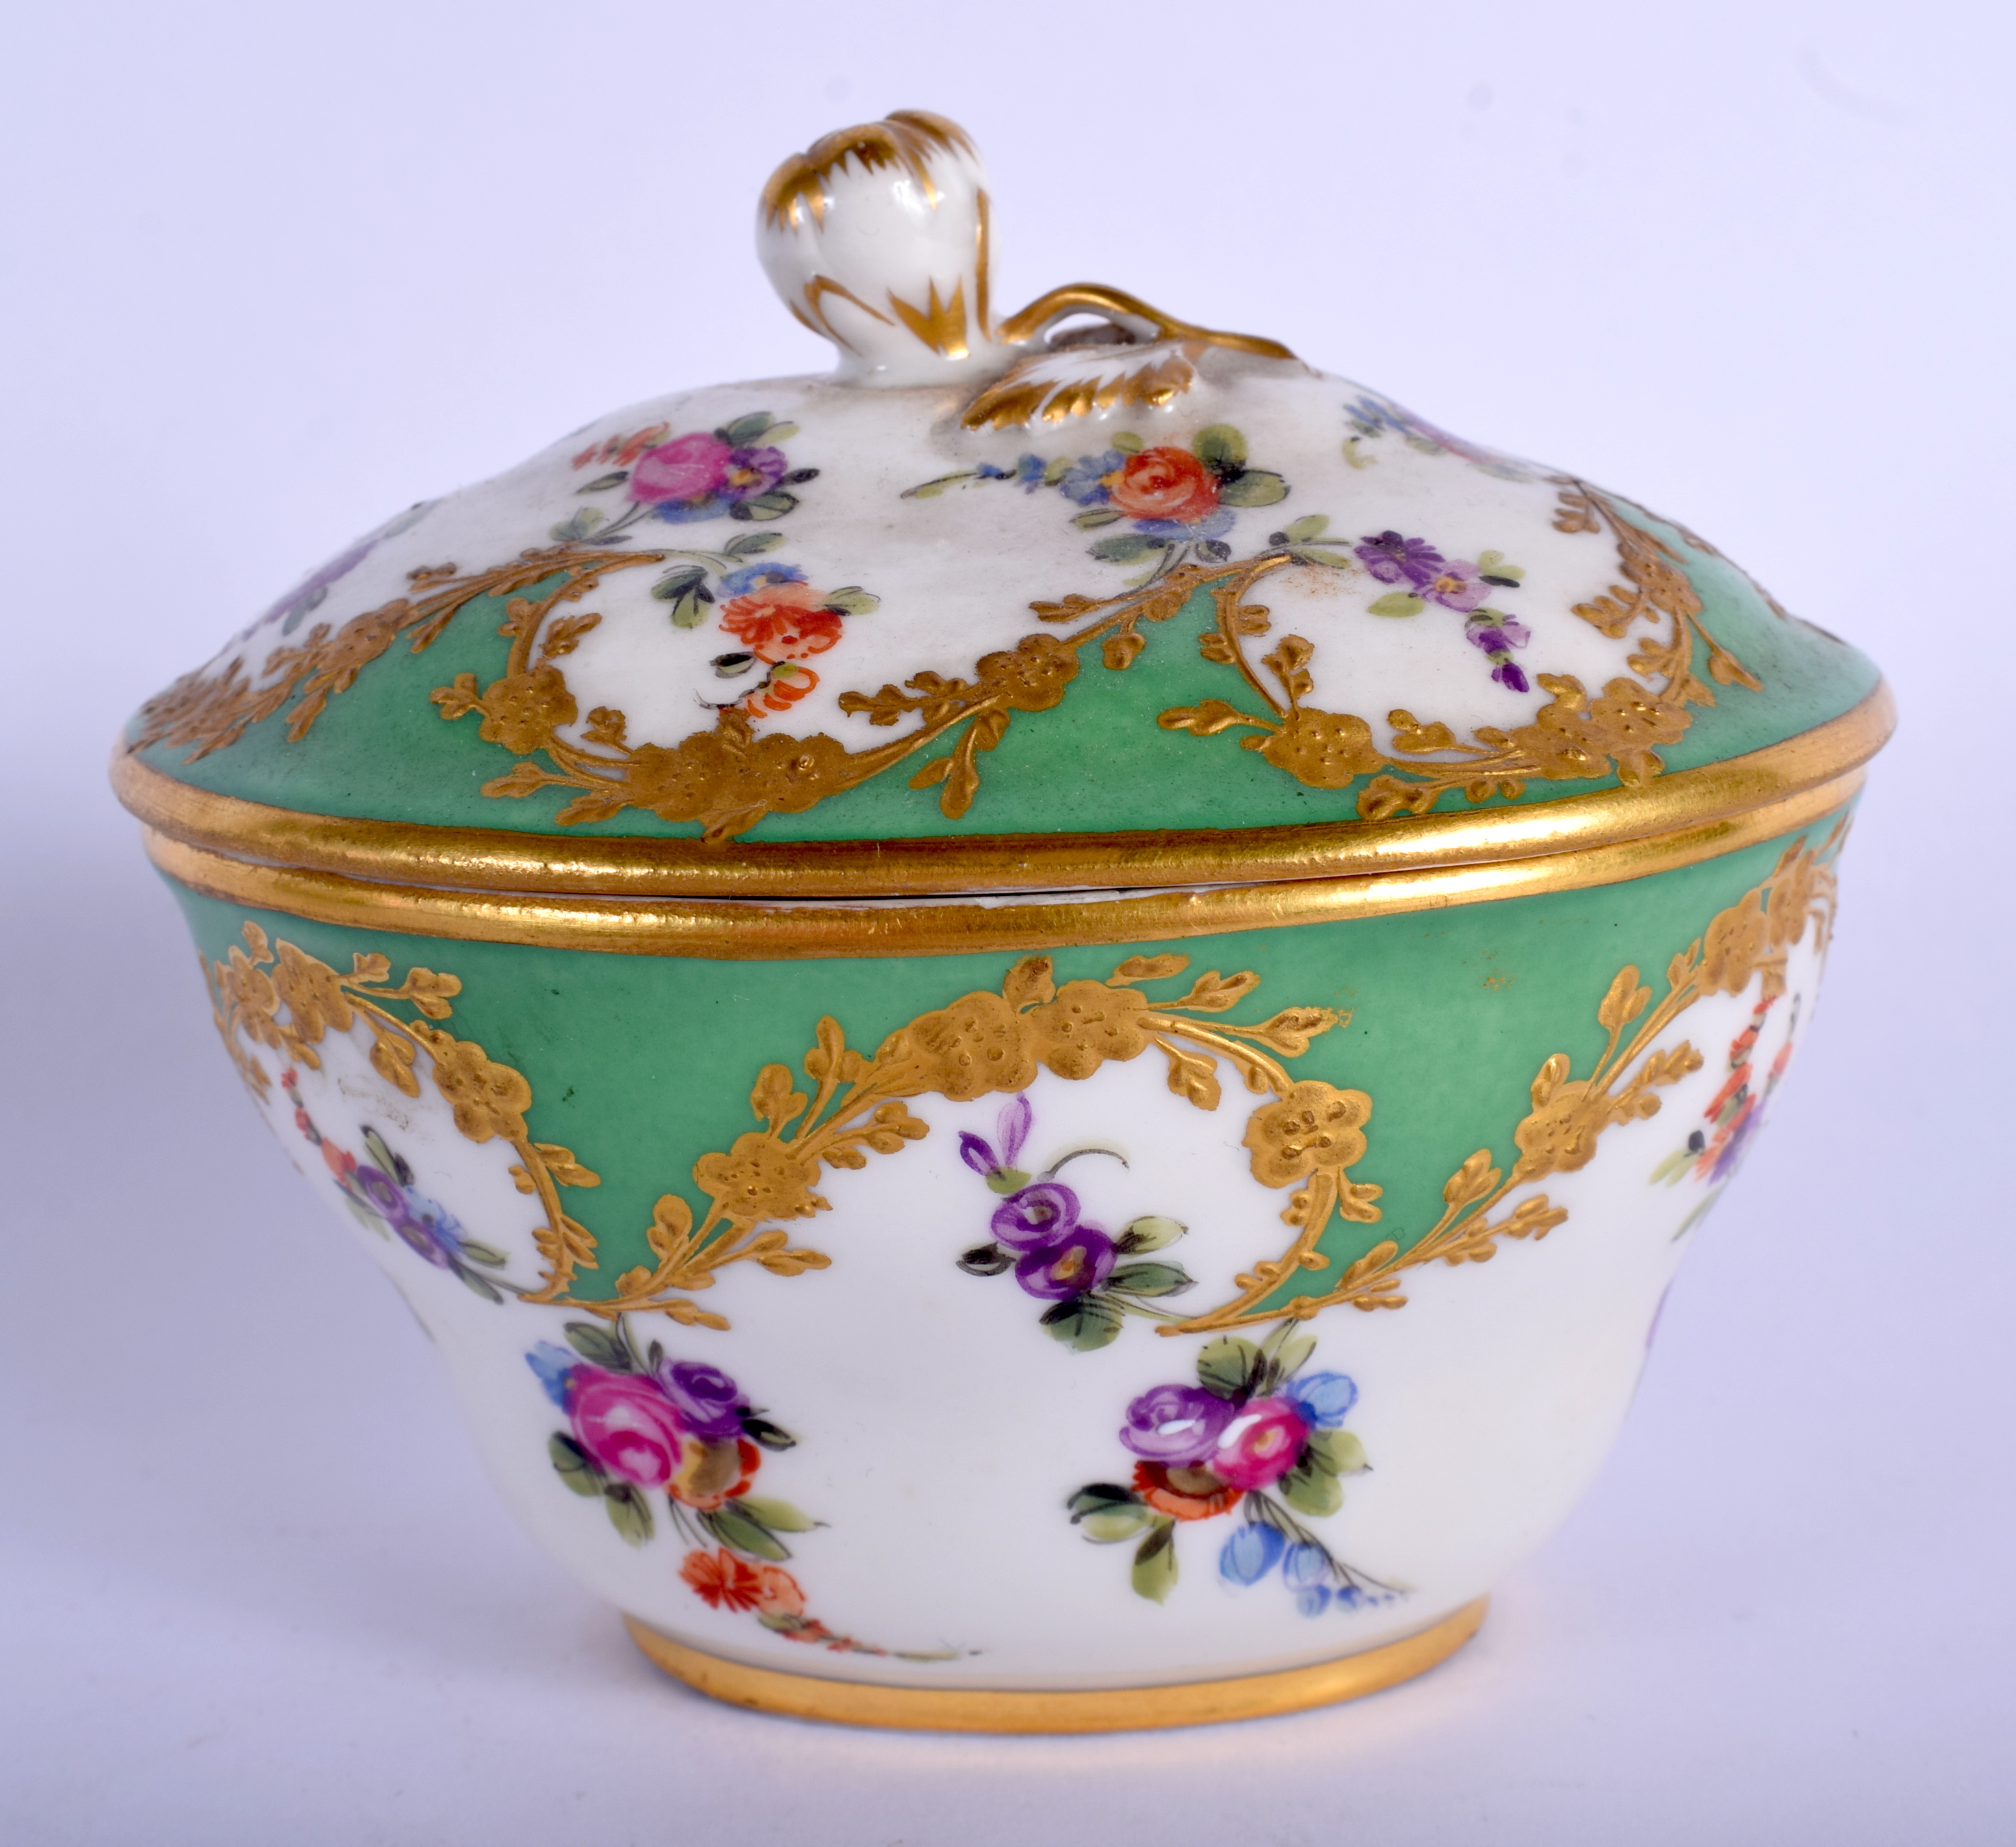 19th c. Paris porcelain oval box and cover painted with flowers in a shape raised gilt panel on an a - Image 2 of 4